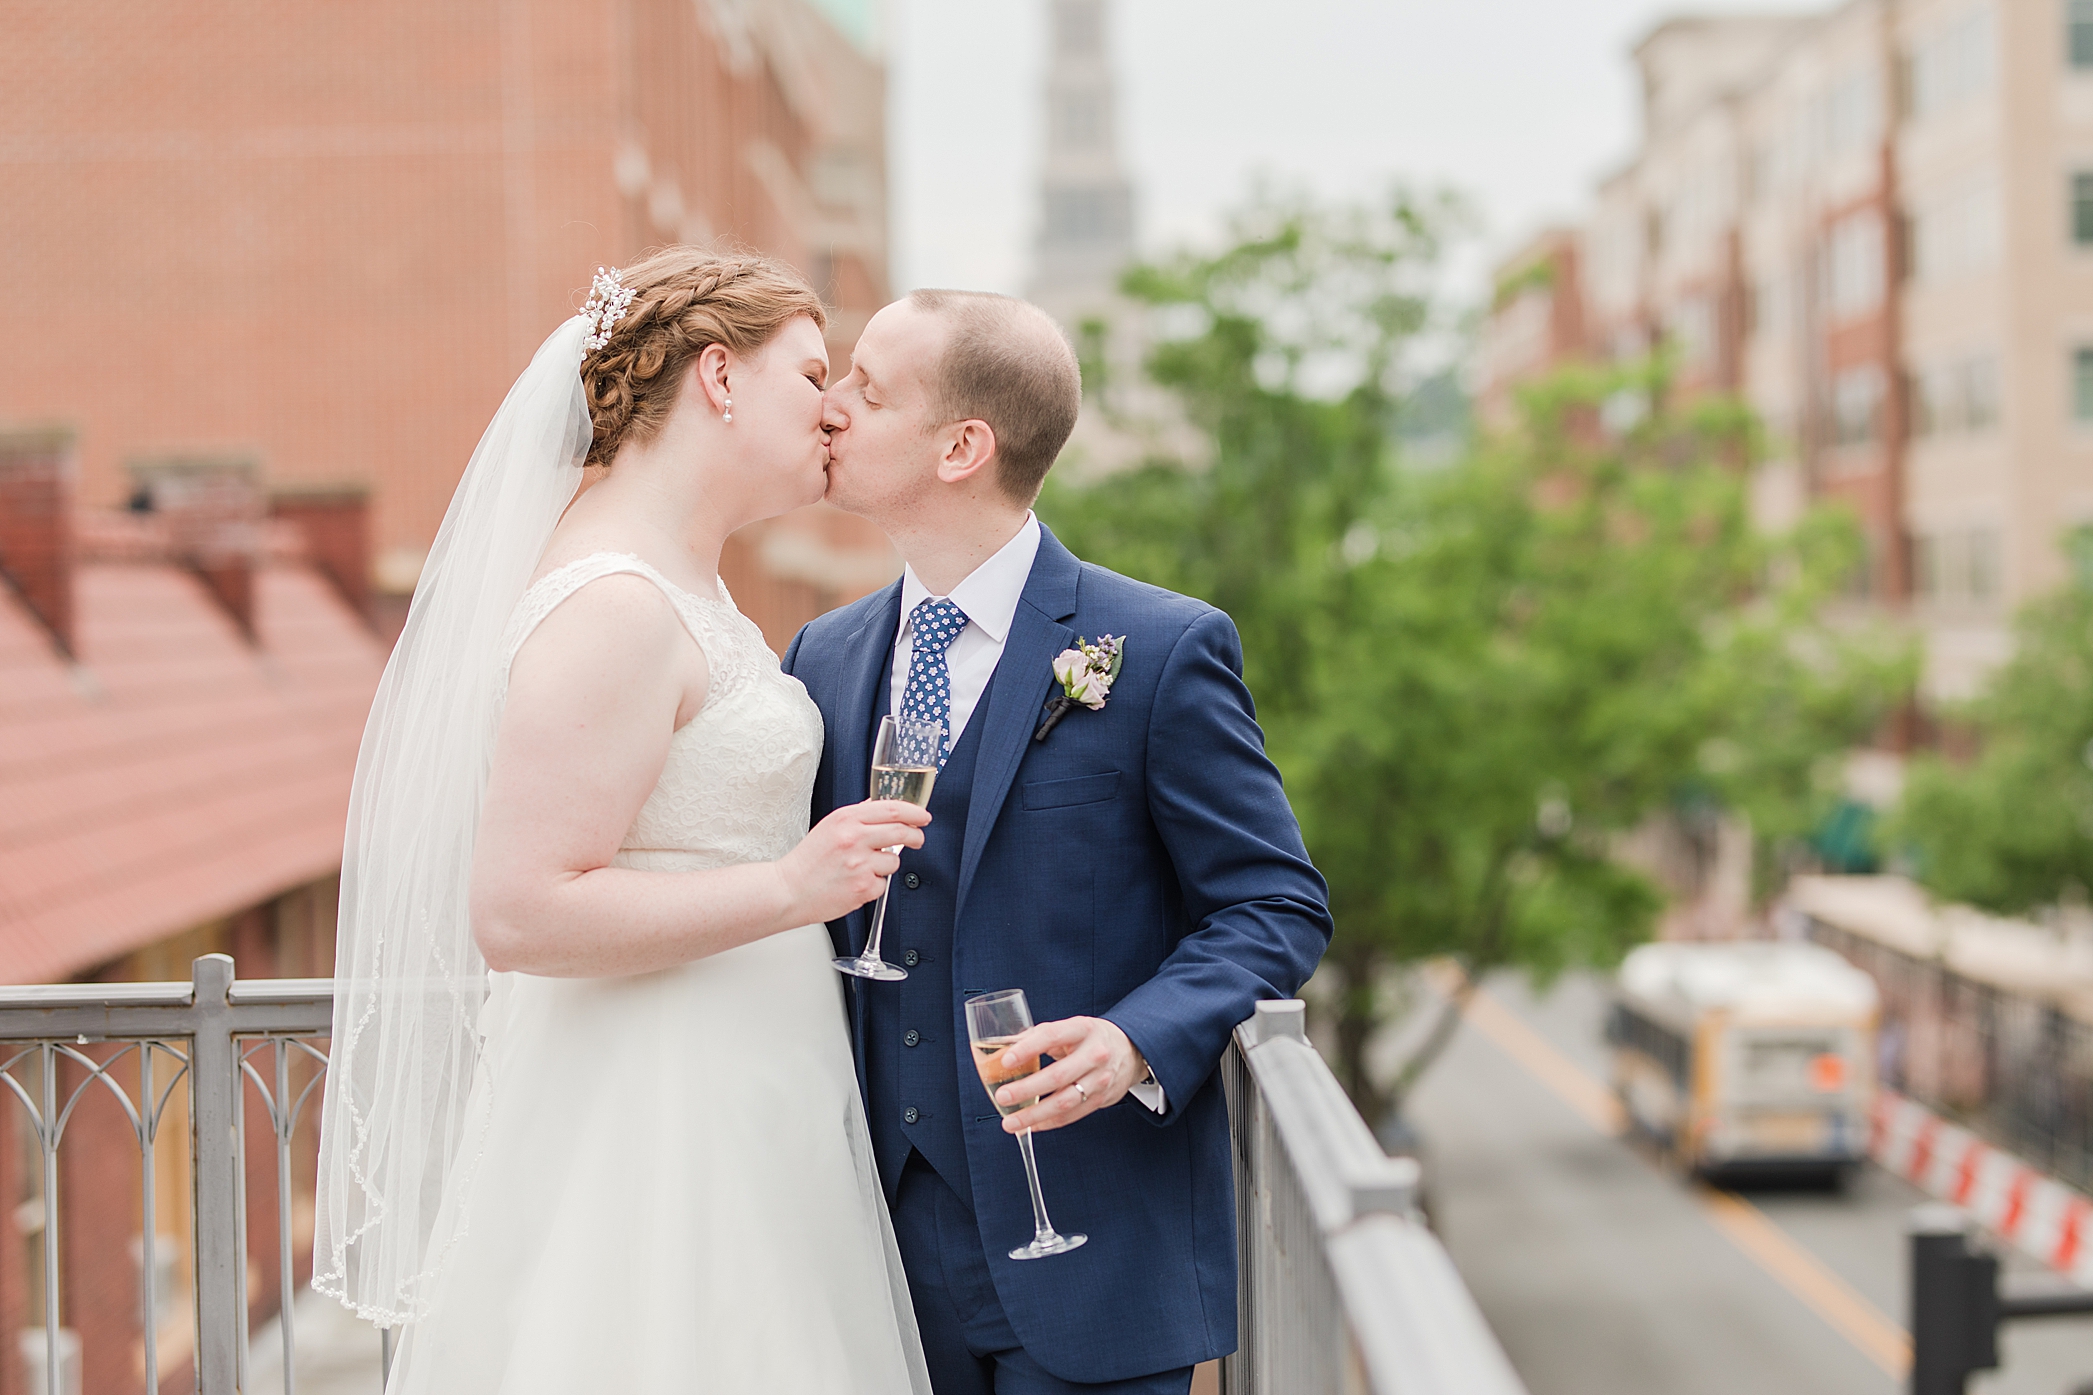 Bride and Groom at Lorien Hotel & Spa by Costola Photography